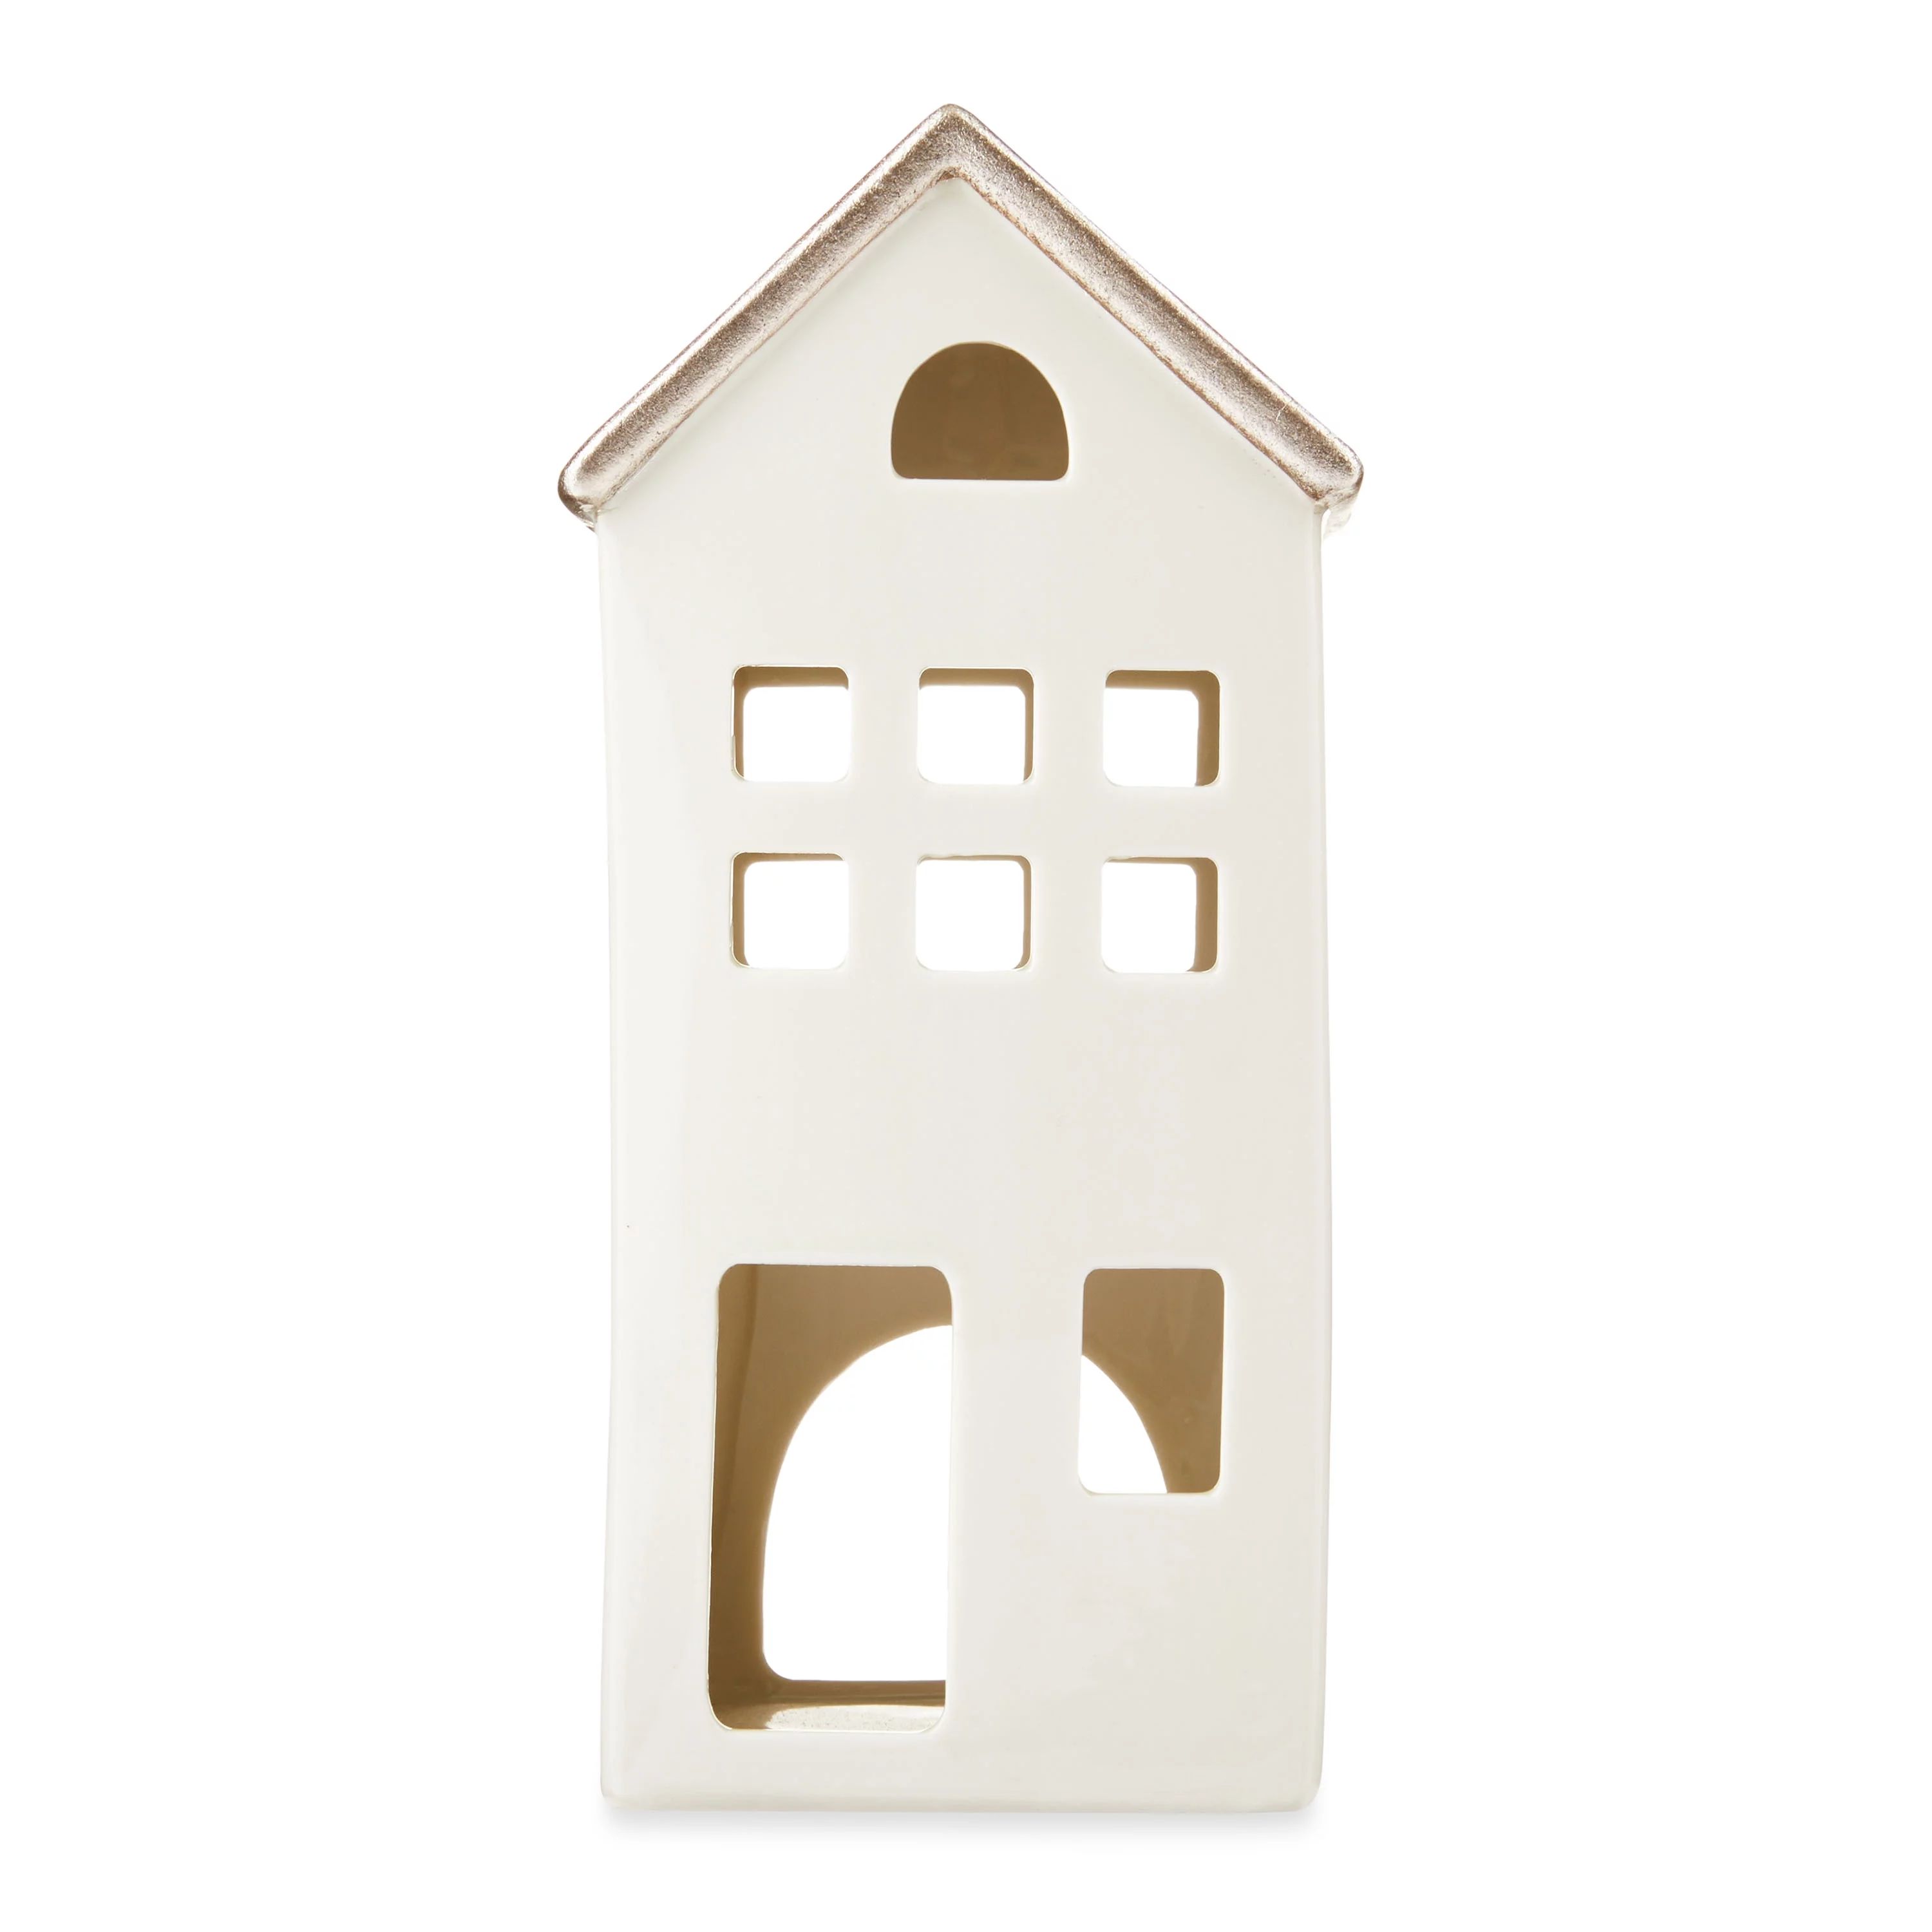 My Texas House My Texas House White Ceramic House, 8 inch (4.4)4.4 stars out of 19 reviews19 revi... | Walmart (US)